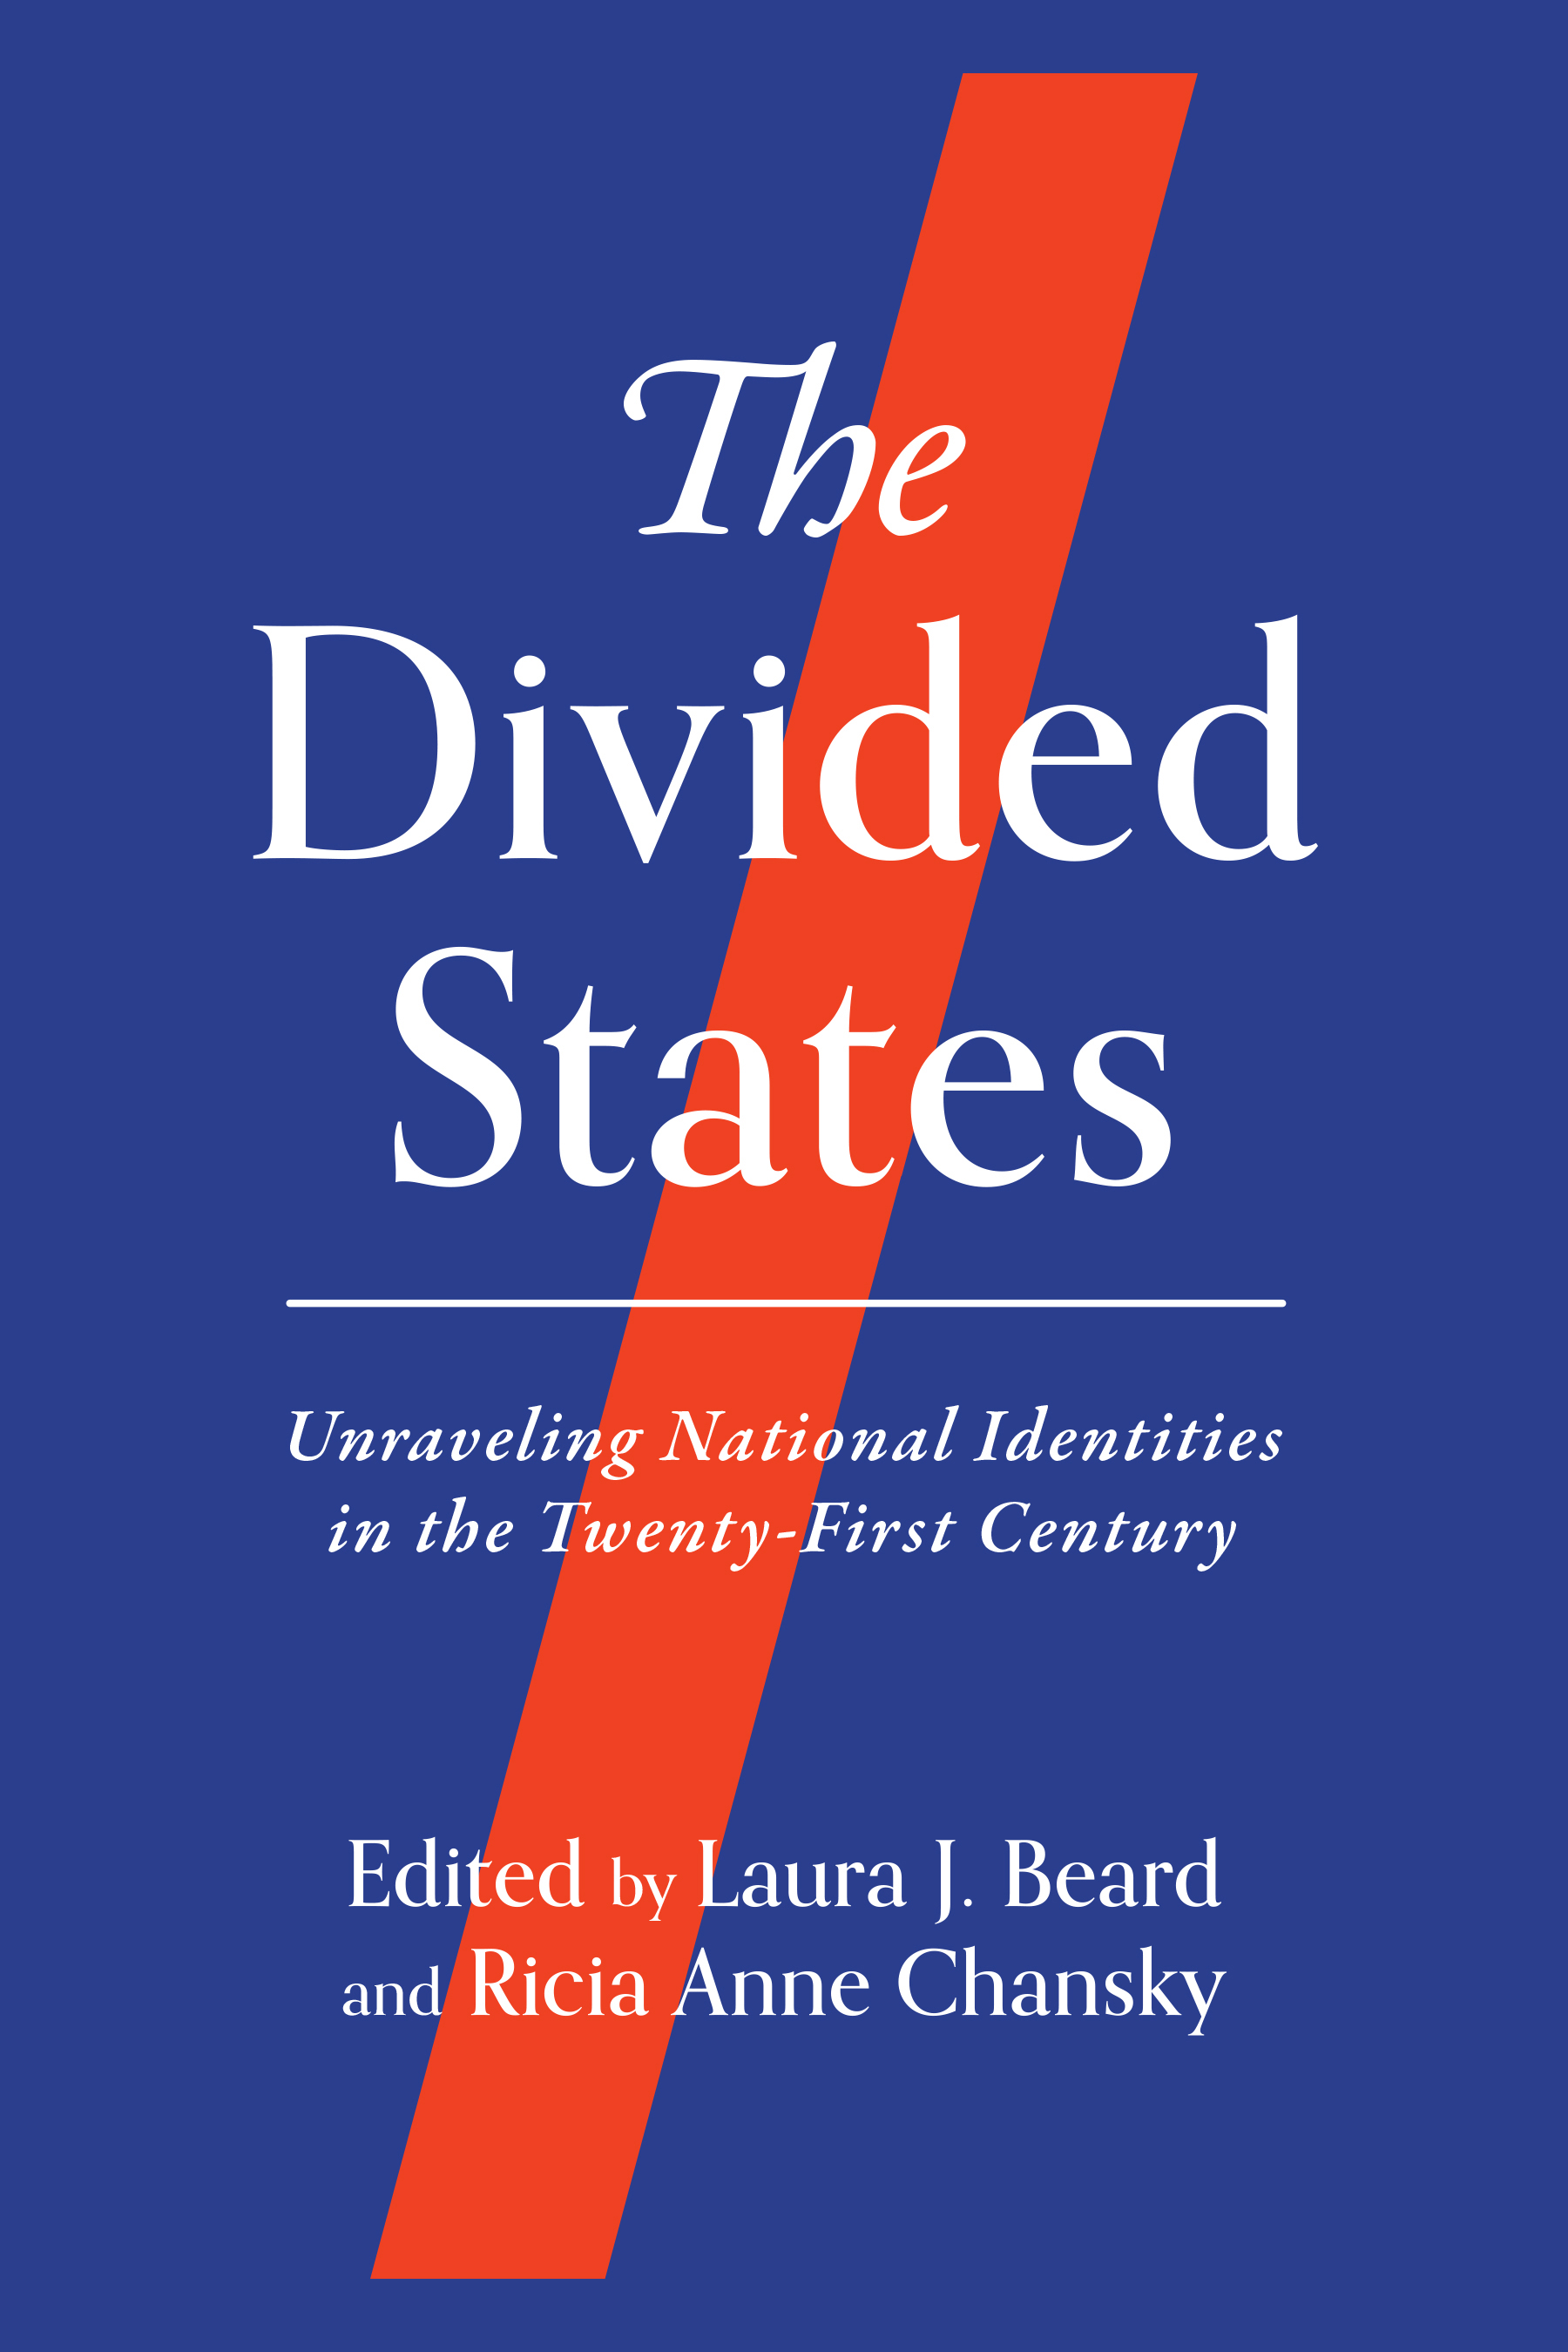 the-divided-states-2023-book-cover.jpg